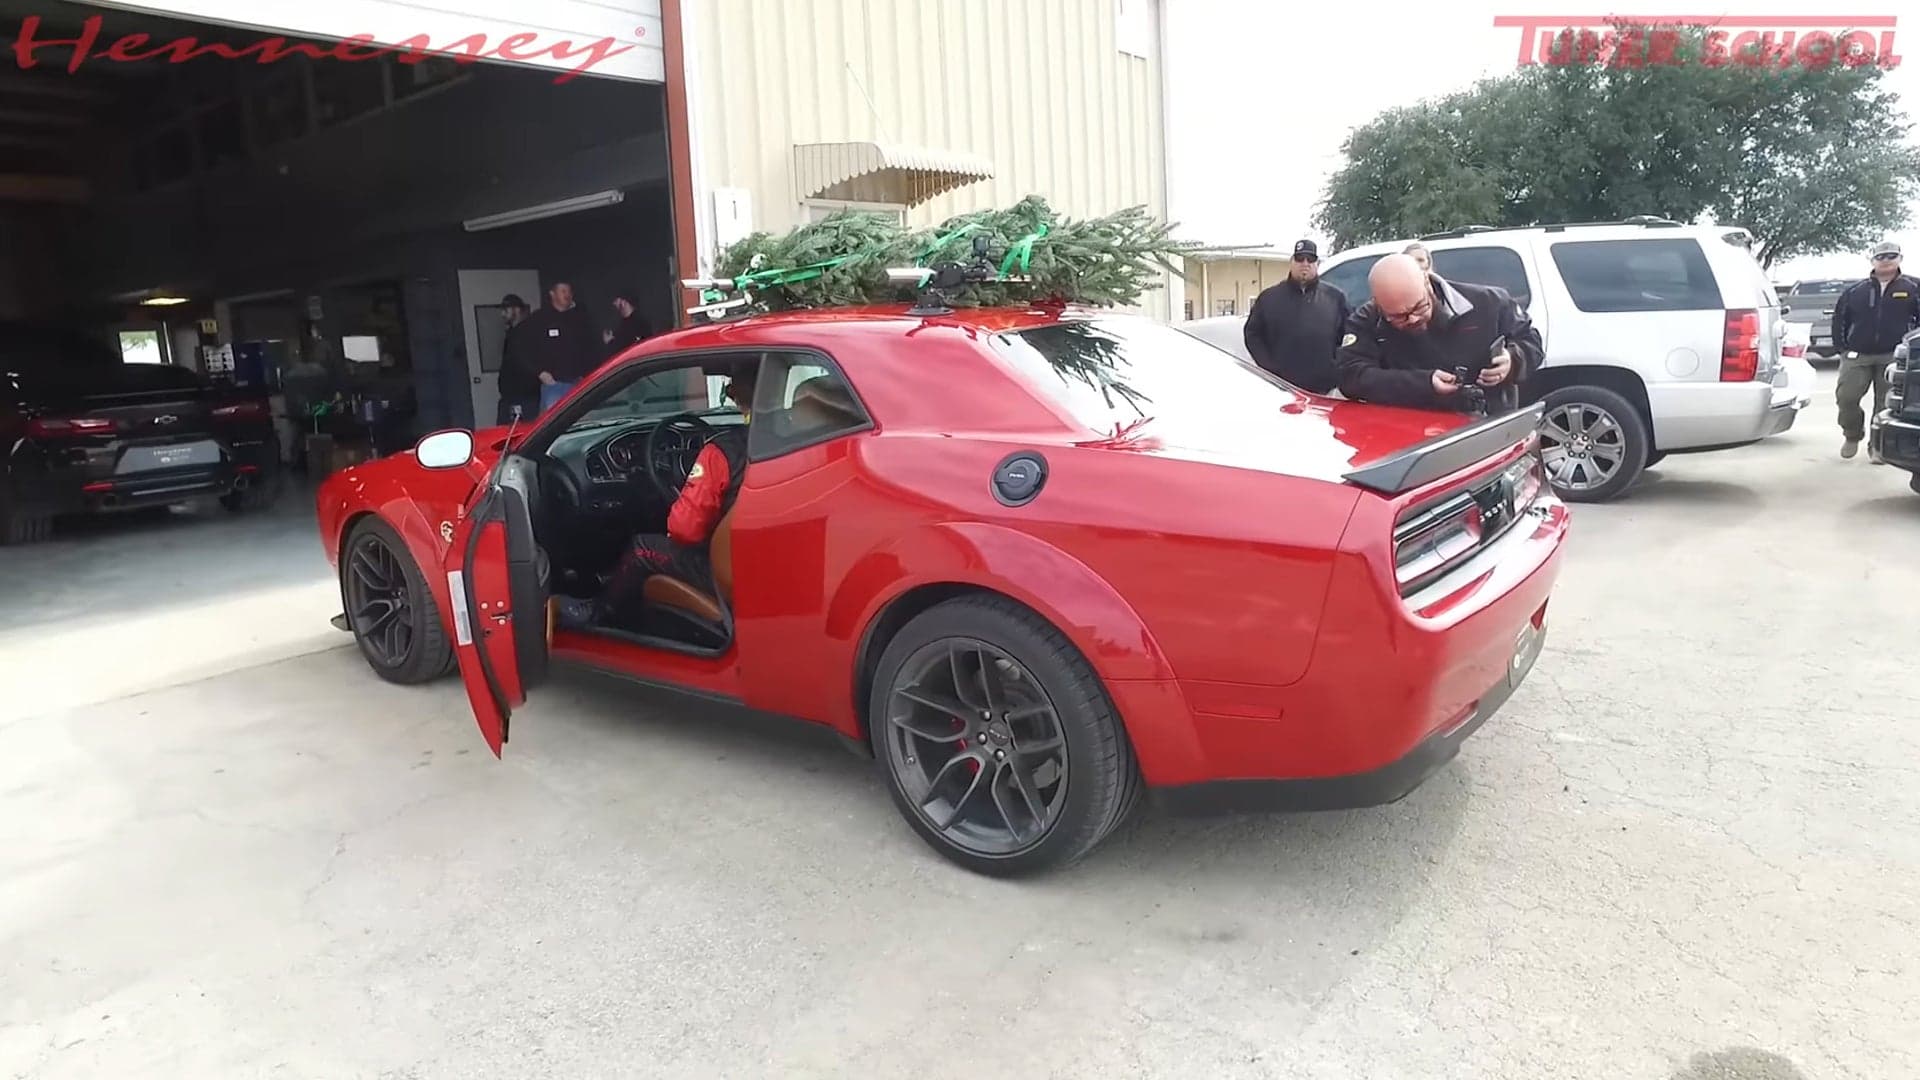 The World’s Fastest Christmas Tree Lives On Top of a Hellcat